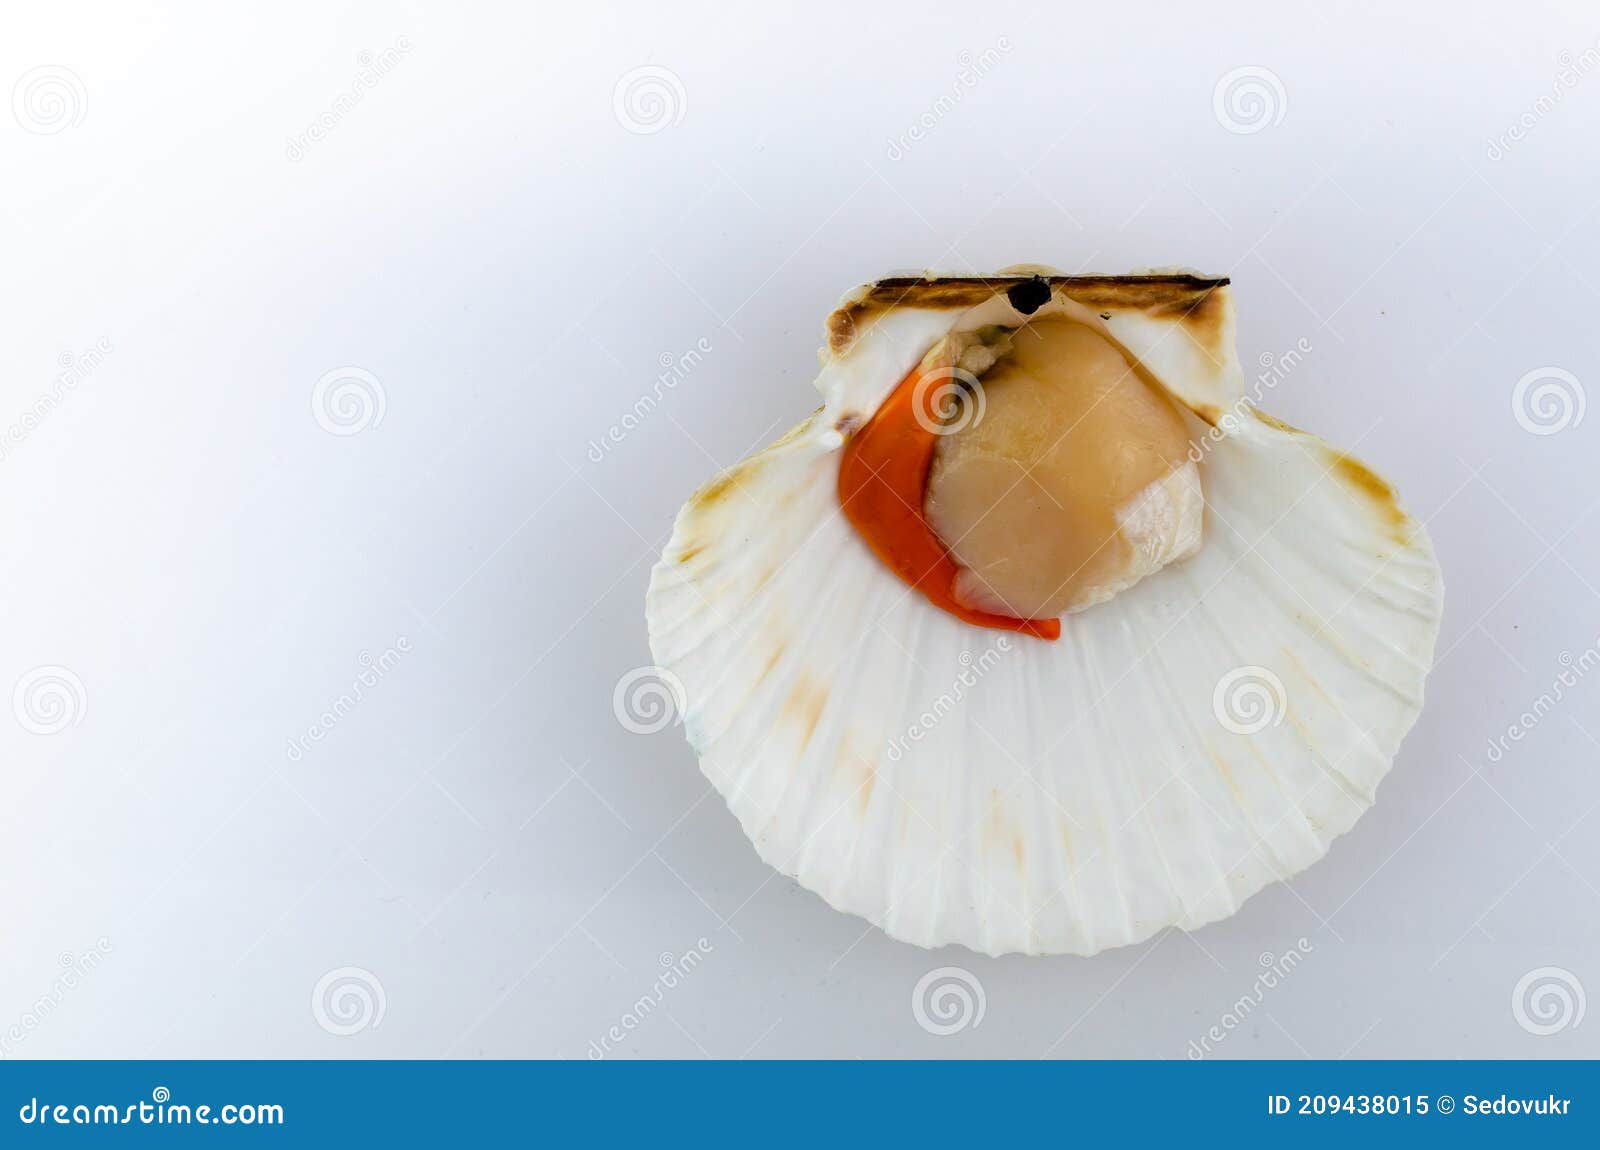 King Scallop on the Half Shell Isolated on White with Copy Space ...